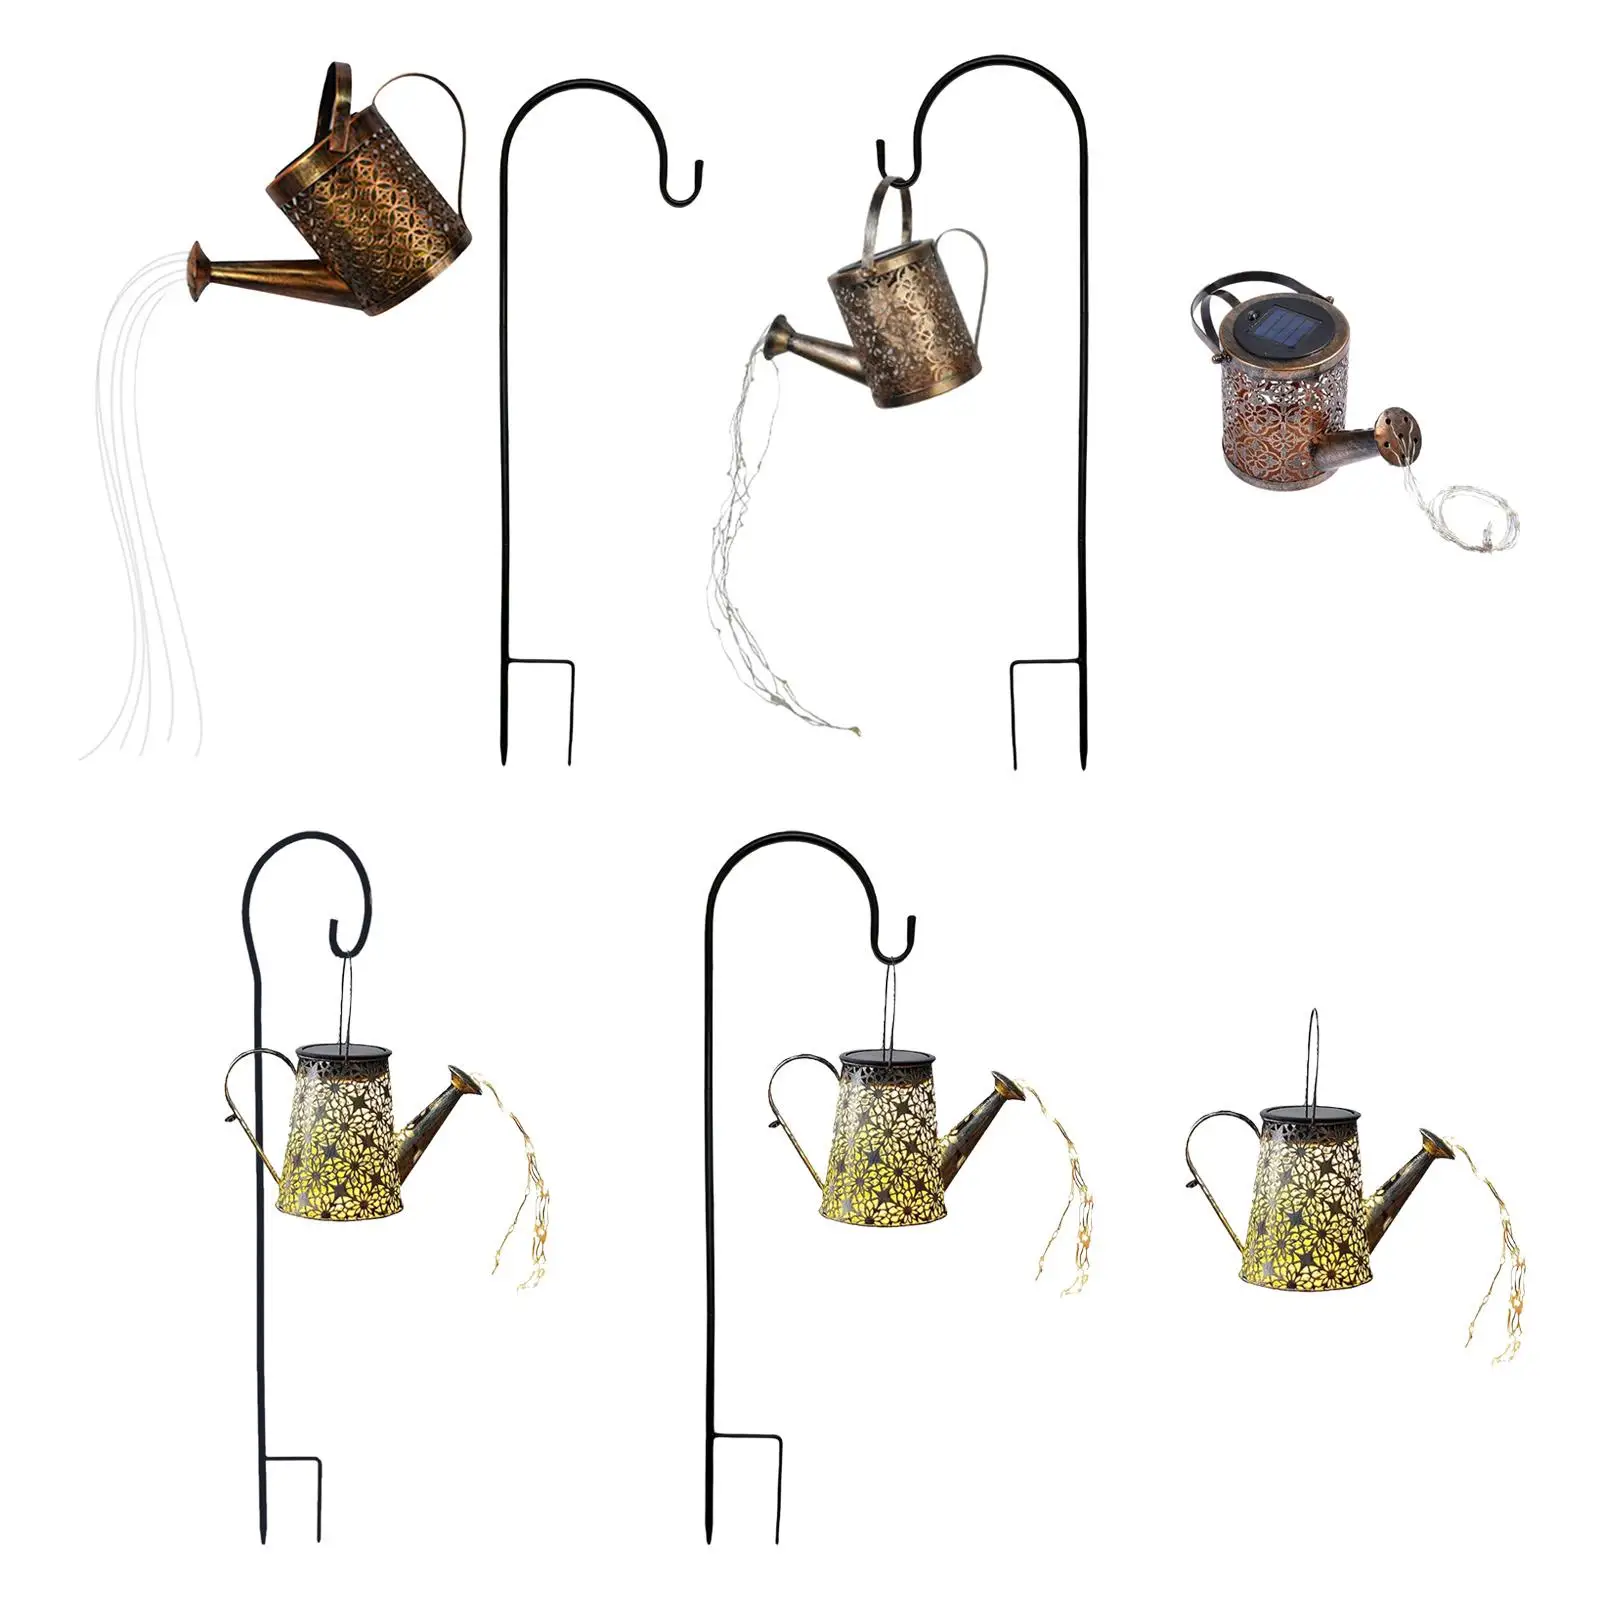 Outdoor Solar Watering Can Lights Lantern Lamp Hanging Kettle Lantern Light Ornament for Walkway Porch Lawn Pathway Patio